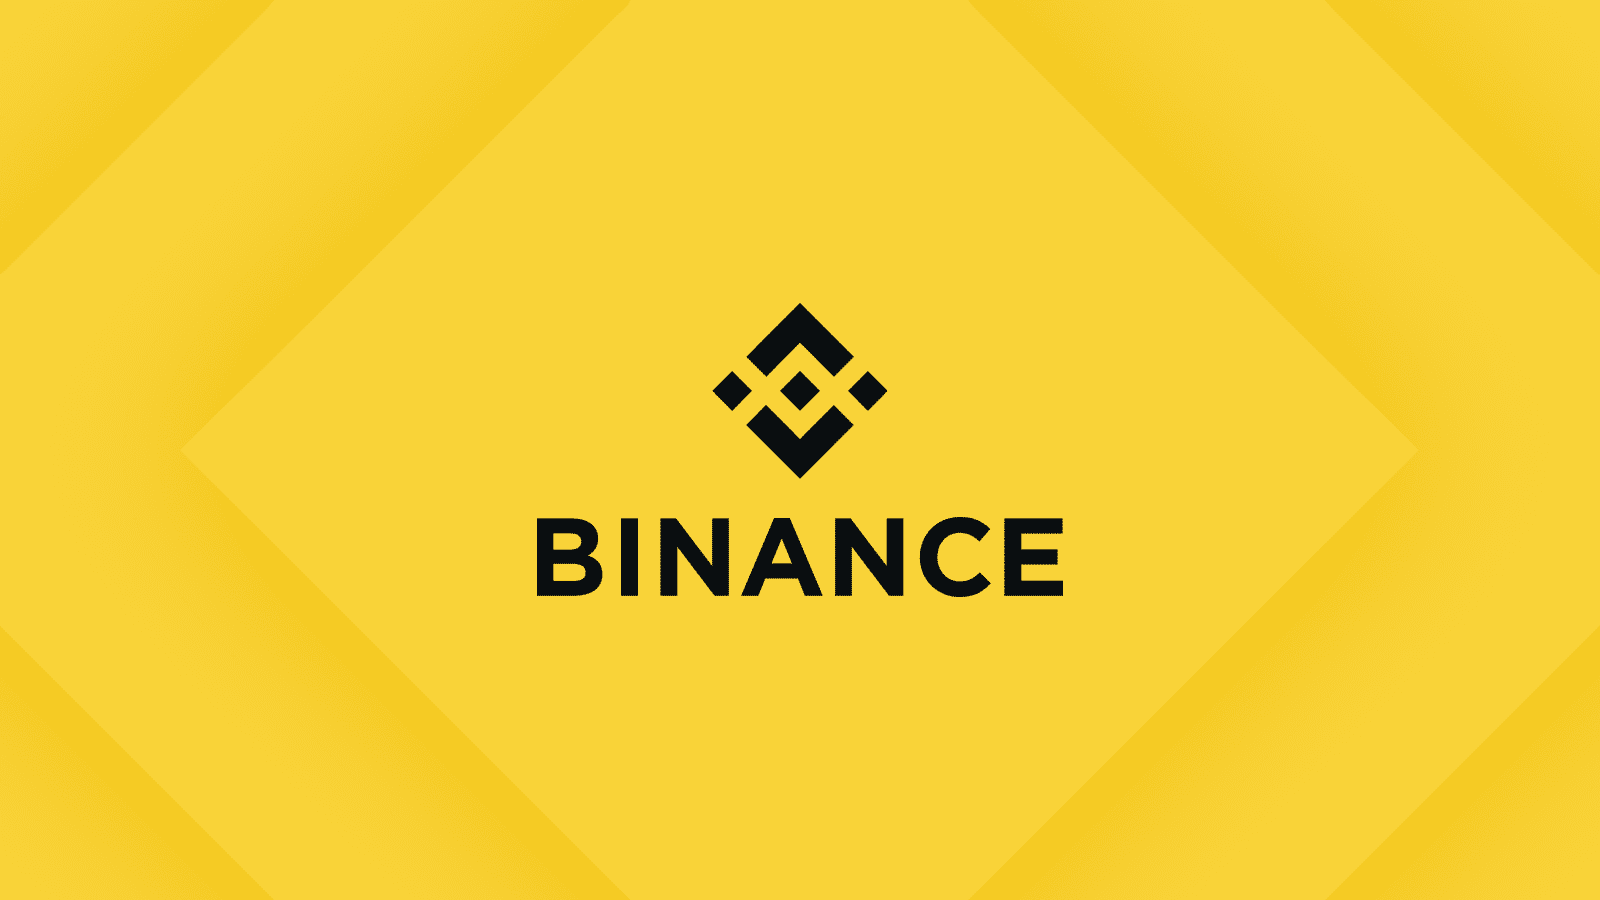 Binance to Pay Record $2.7 Billion to Settle CFTC Cryptocurrency Investigation